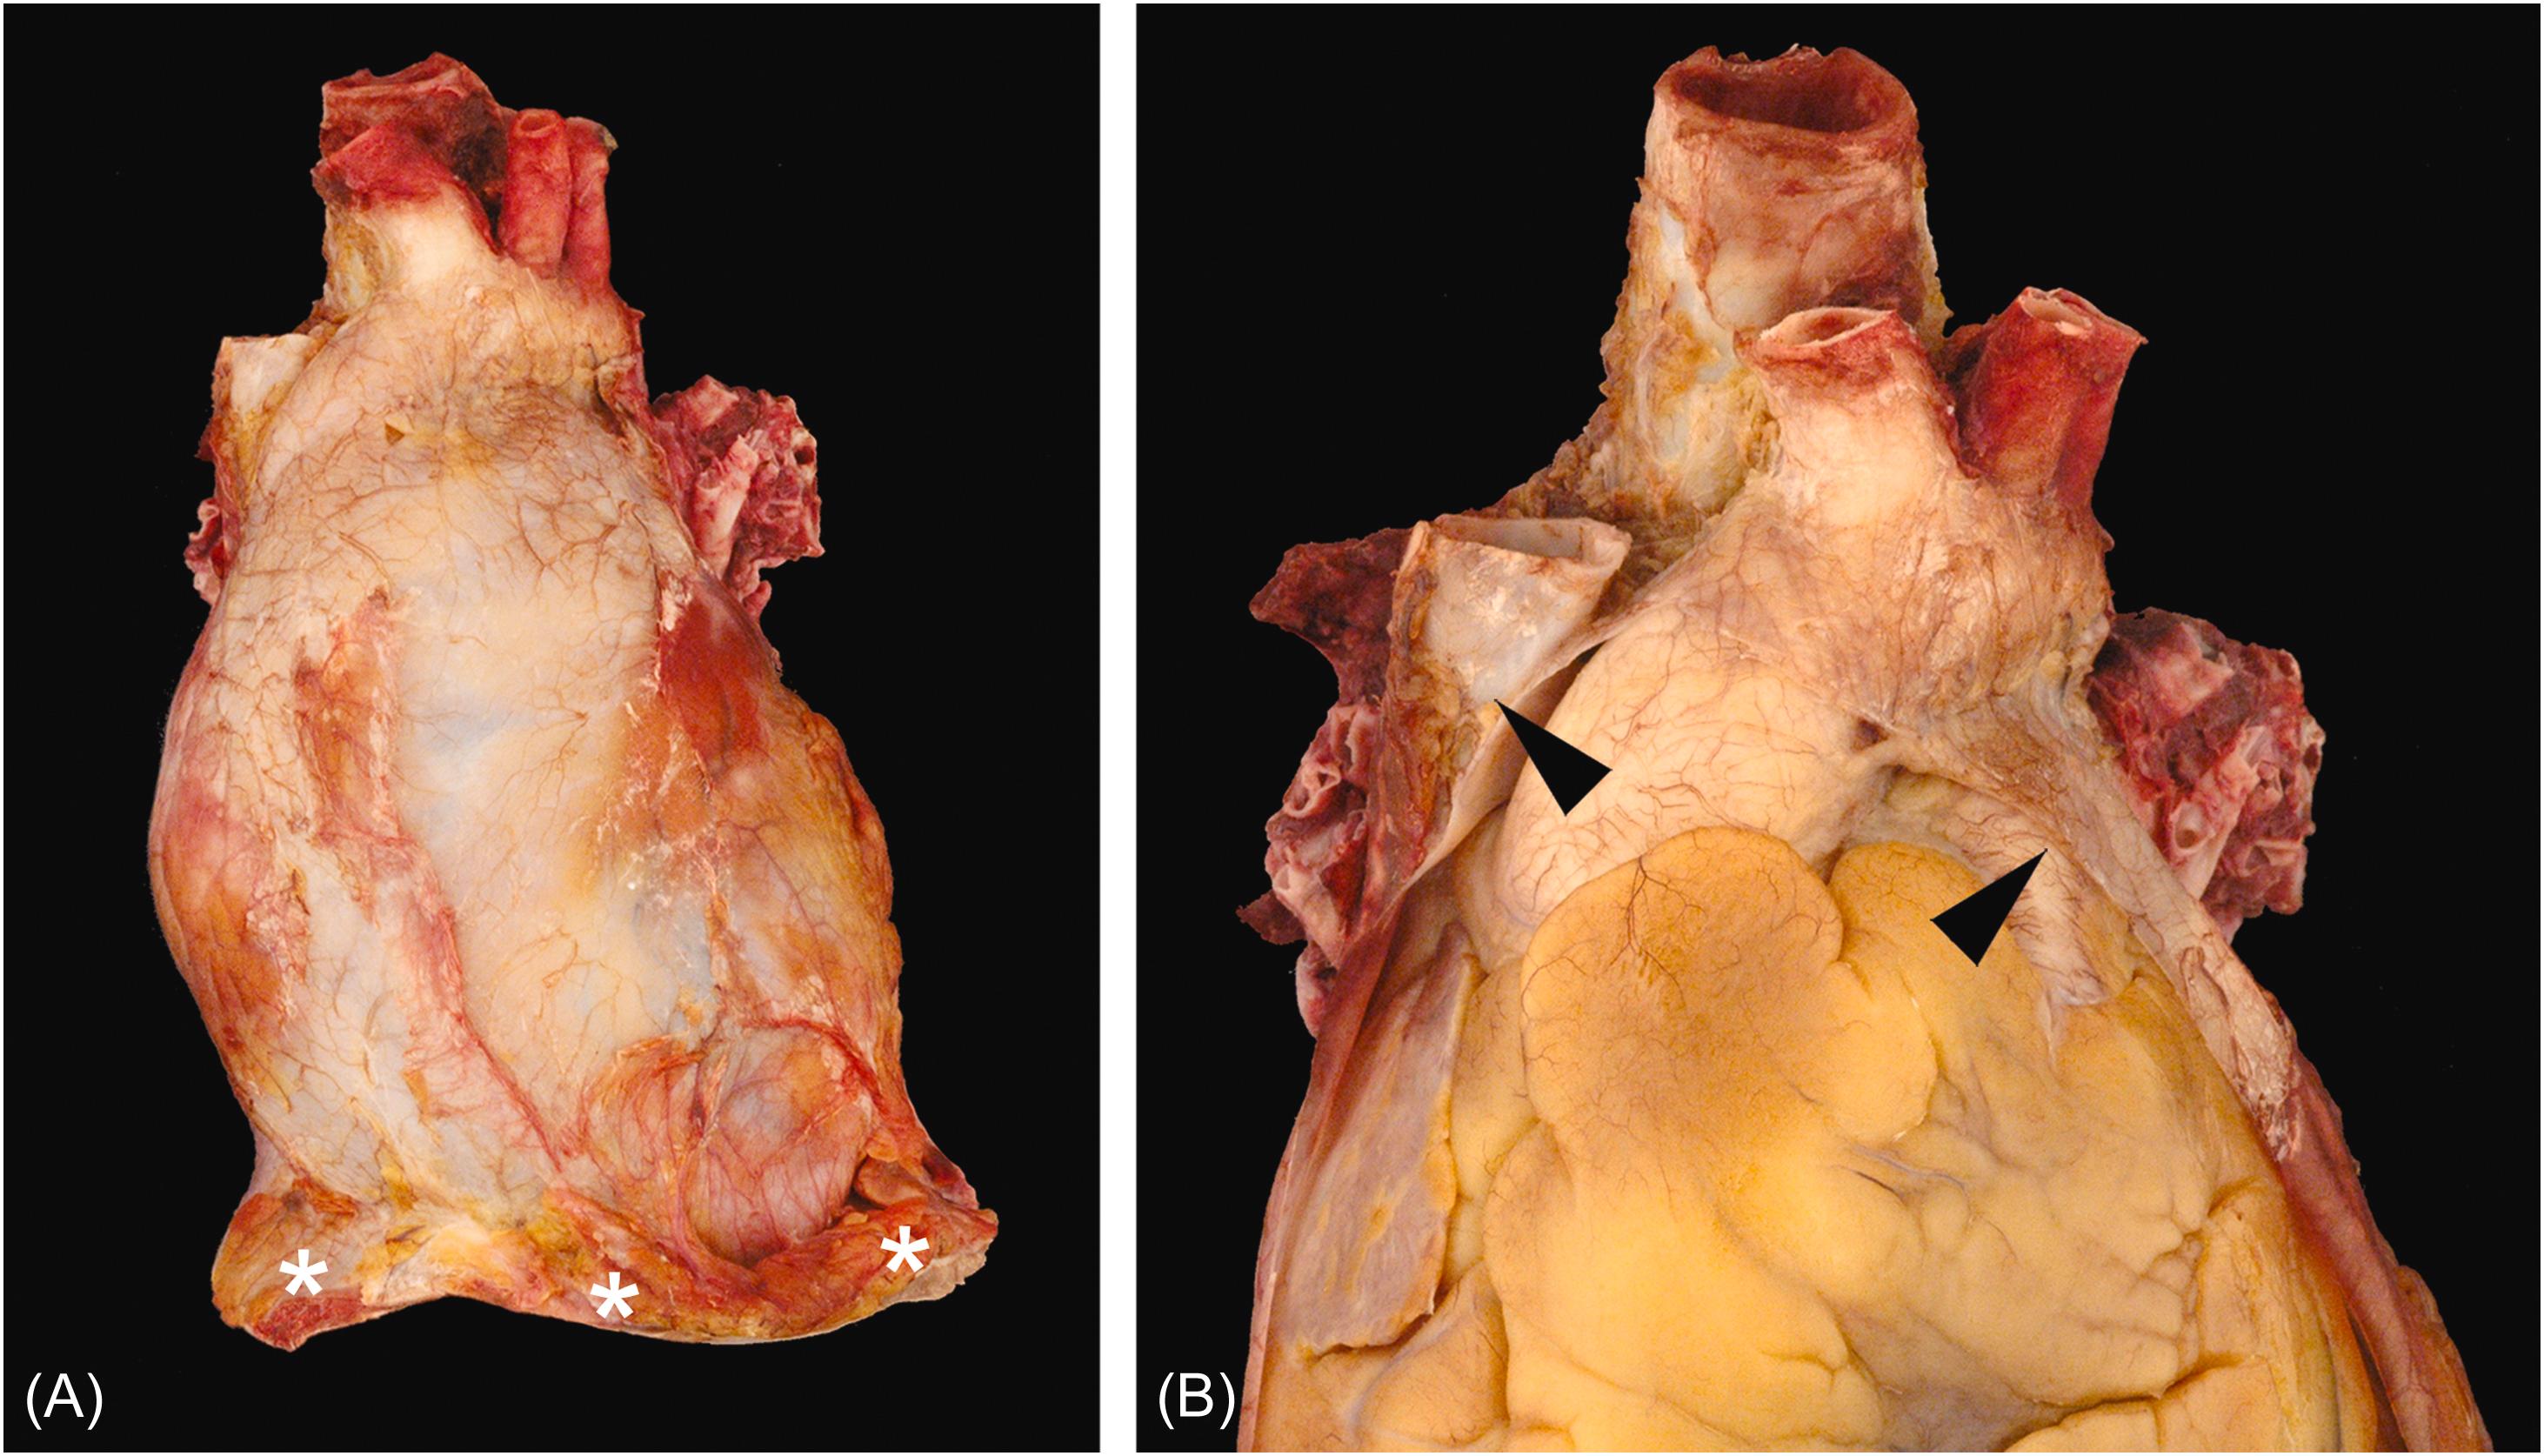 Figure 2.1, Pericardium. (A) The parietal (fibrous) pericardium covers the heart and proximal great arteries. The diaphragm (asterisks) can be seen along the inferior border. (B) With the anterior parietal pericardium removed (arrowheads), the relationship with the heart (invested with visceral pericardium) can be appreciated.